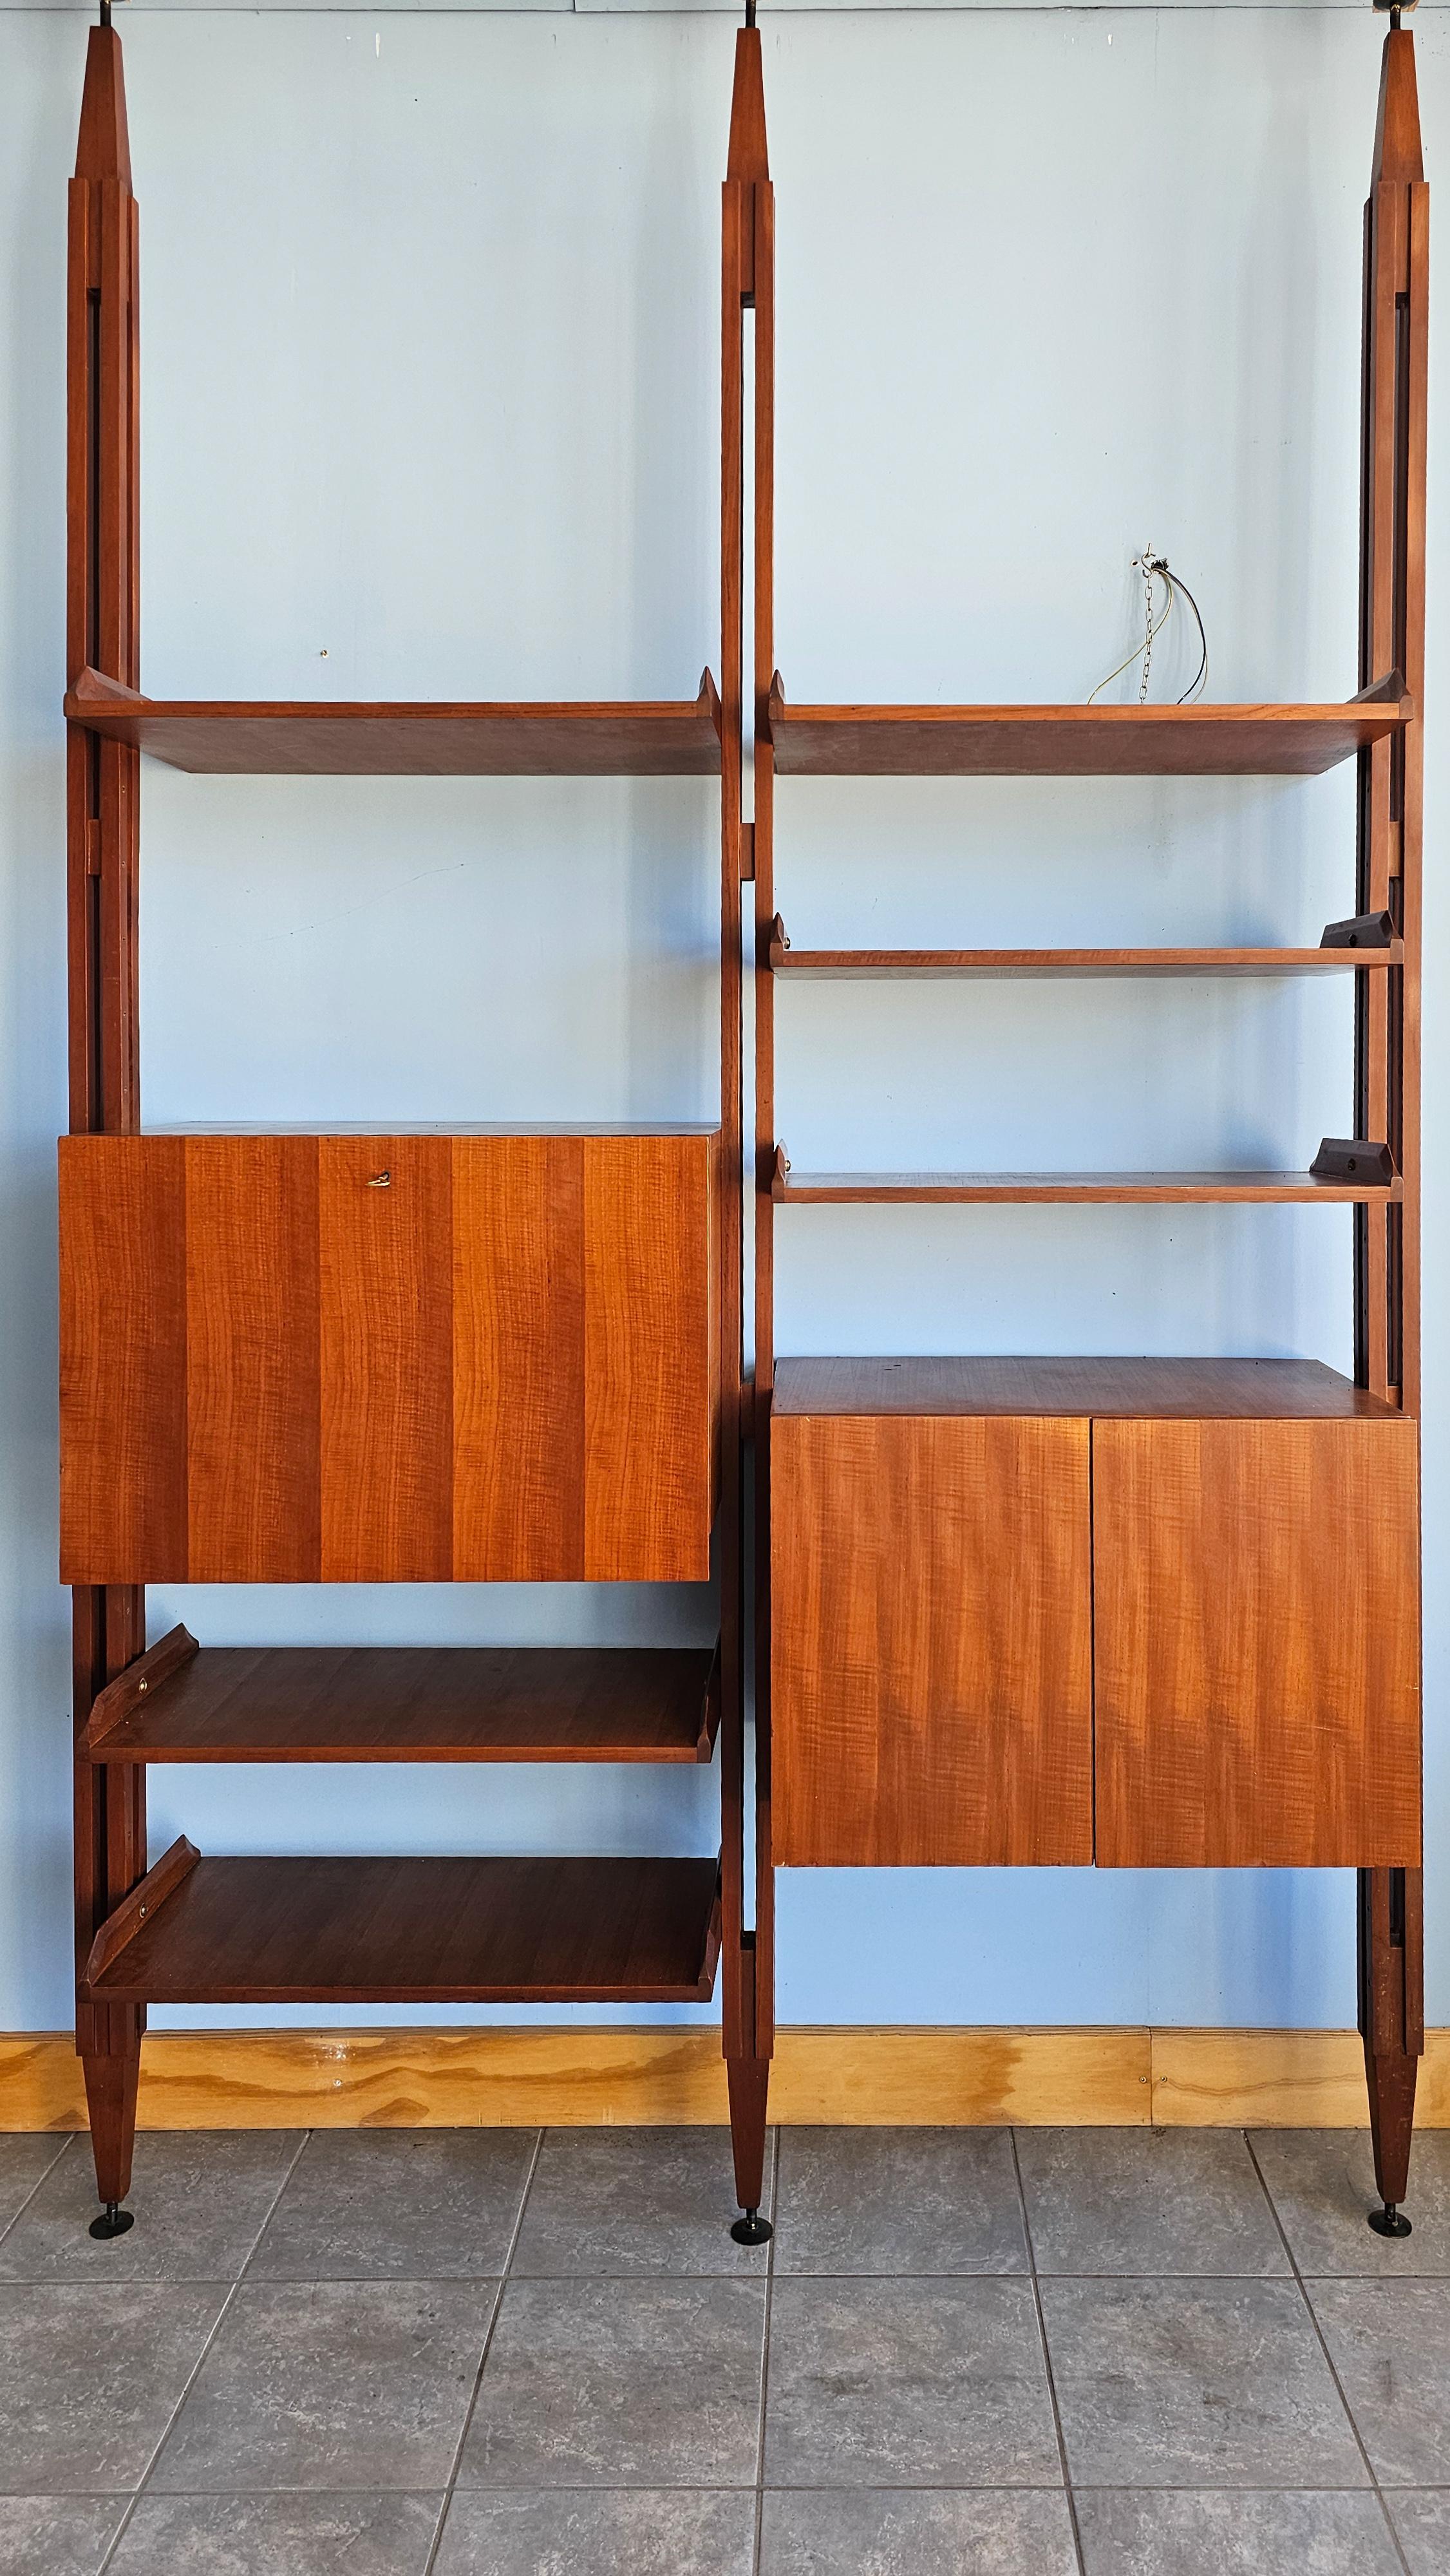 The iconic ceiling-mounted bookcase model 'LB7', designed by the renowned designer Franco Albini around 1960, represents a unique example of refined and functional design. This innovative structure features two bays with solid teak wood uprights